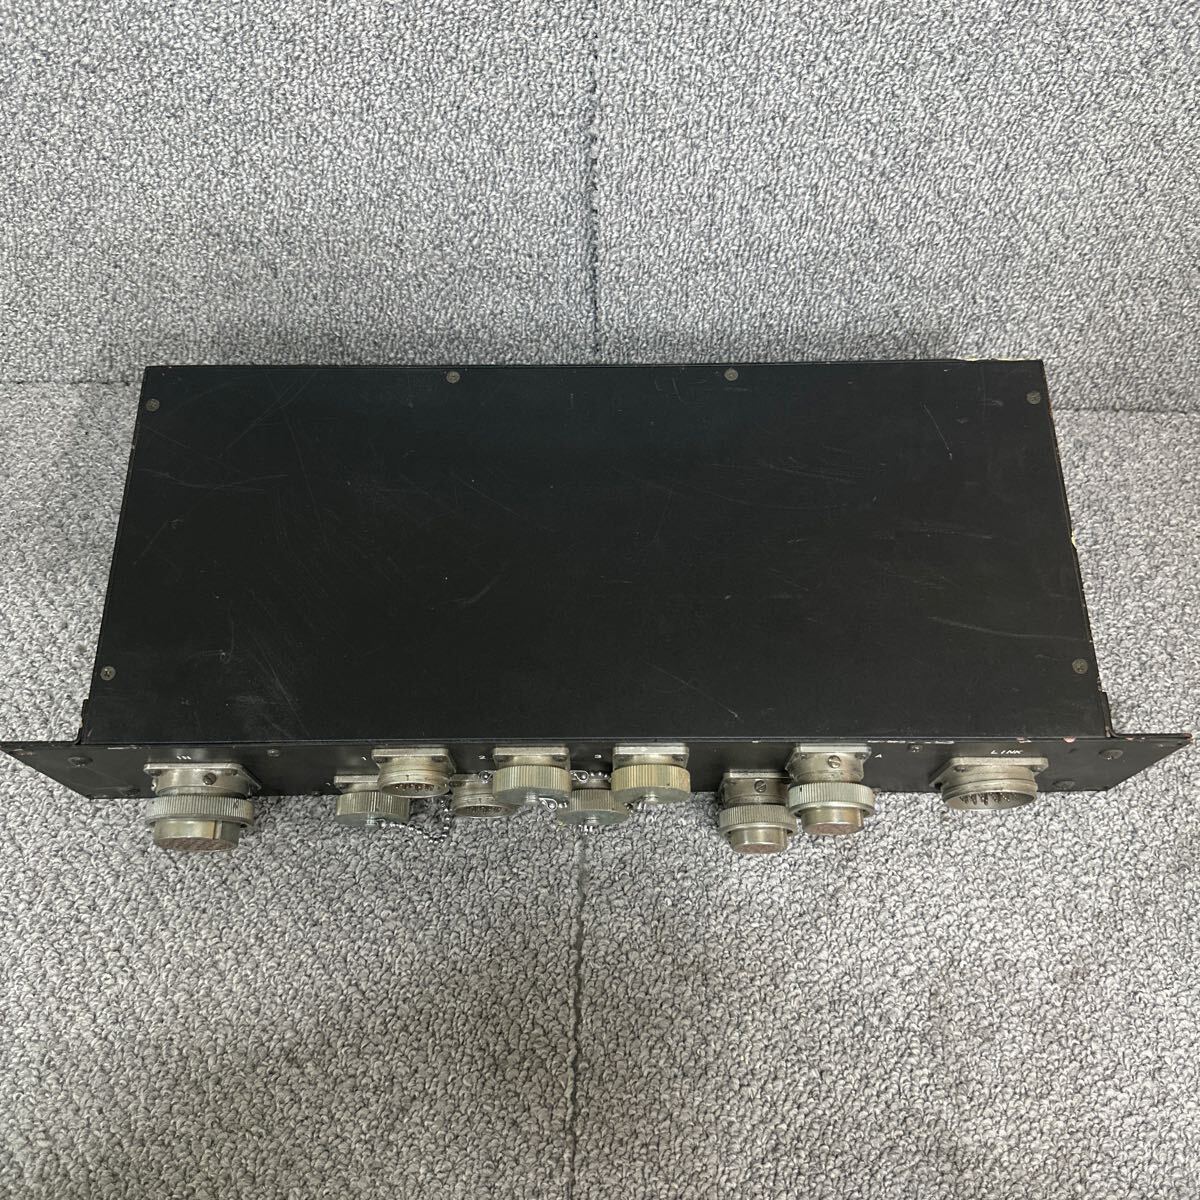 PCN98-1490 super-discount patch bay? Patchbay? patch record? IN OUT connection power supply connector box Manufacturers pattern number unknown not yet verification used present condition goods 